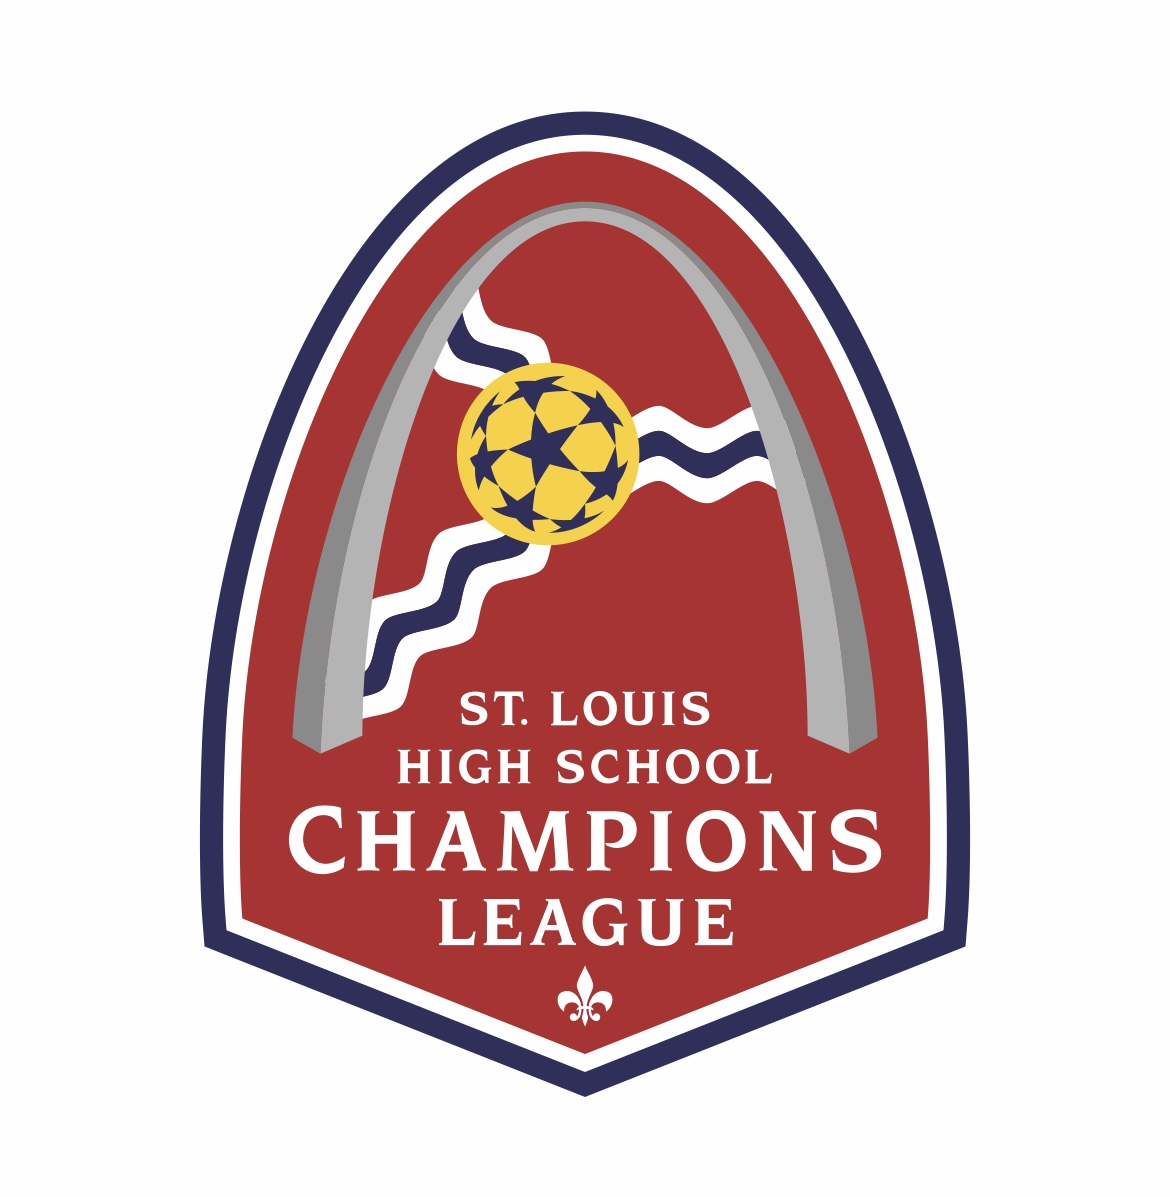 The HS Champions League thanks Select Sport America for recognizing that HS soccer matters. Not everyone can afford expensive pay-to-play club soccer, but everyone goes to HS. There are some good players in that category! @TampaBayTopTen @STLchampsleague @timmcevoy2 @kbpwil